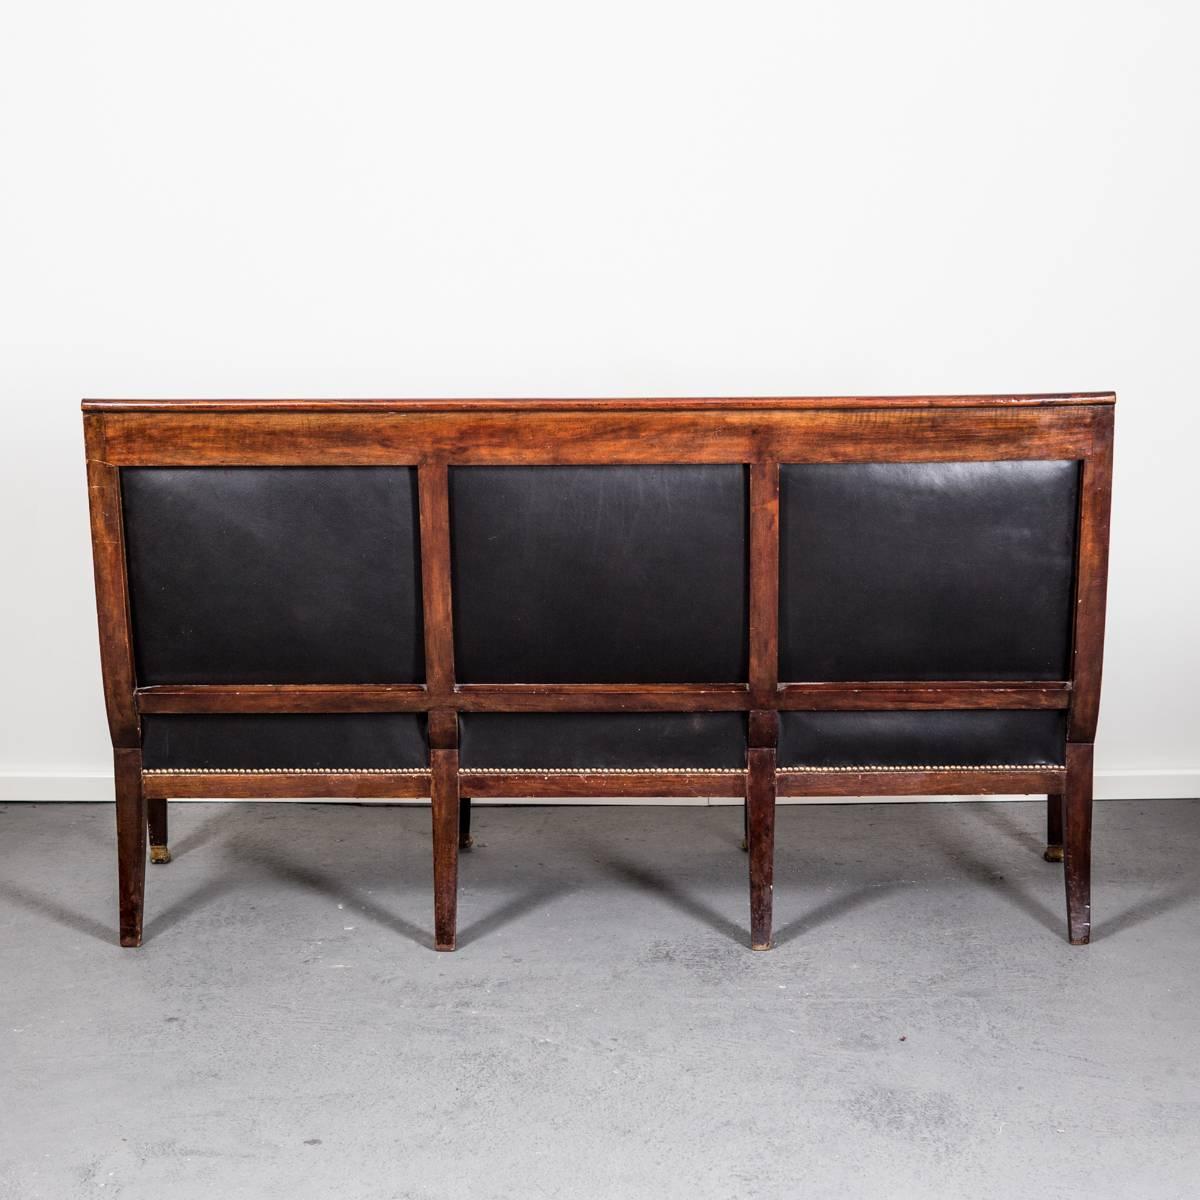 Sofa Bench French Empire Period 1790-1810 Mahogany Black Leather France. A gorgeous sofa made in France during the Empire period, circa 17900-1810. Mahogany frame with gilded brass decor shaped as palm leaves. Tapered legs ending with lion feet